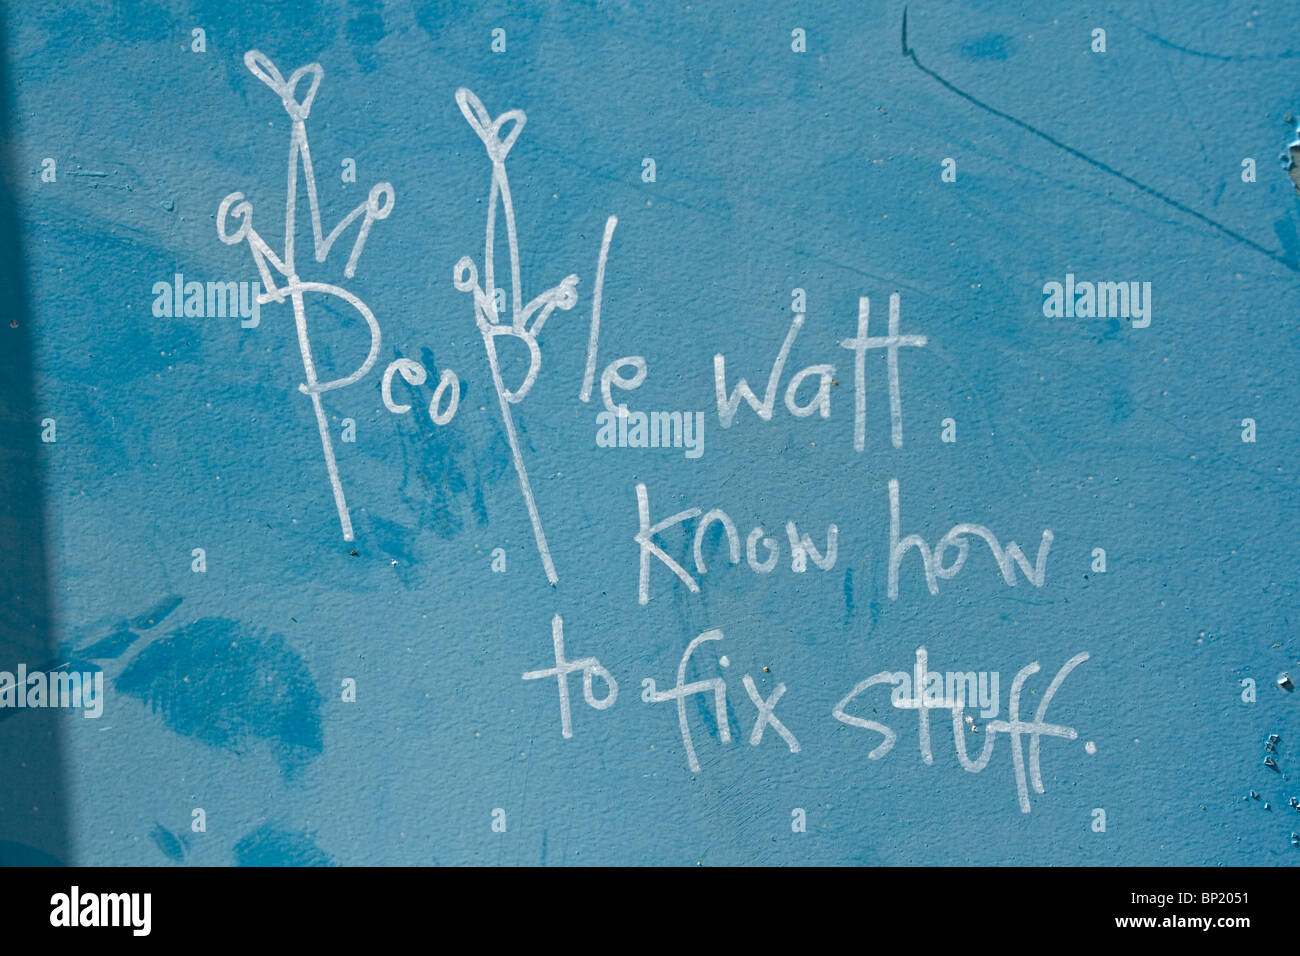 Graffiti on a blue wall suggesting what is needed in the world. Stock Photo